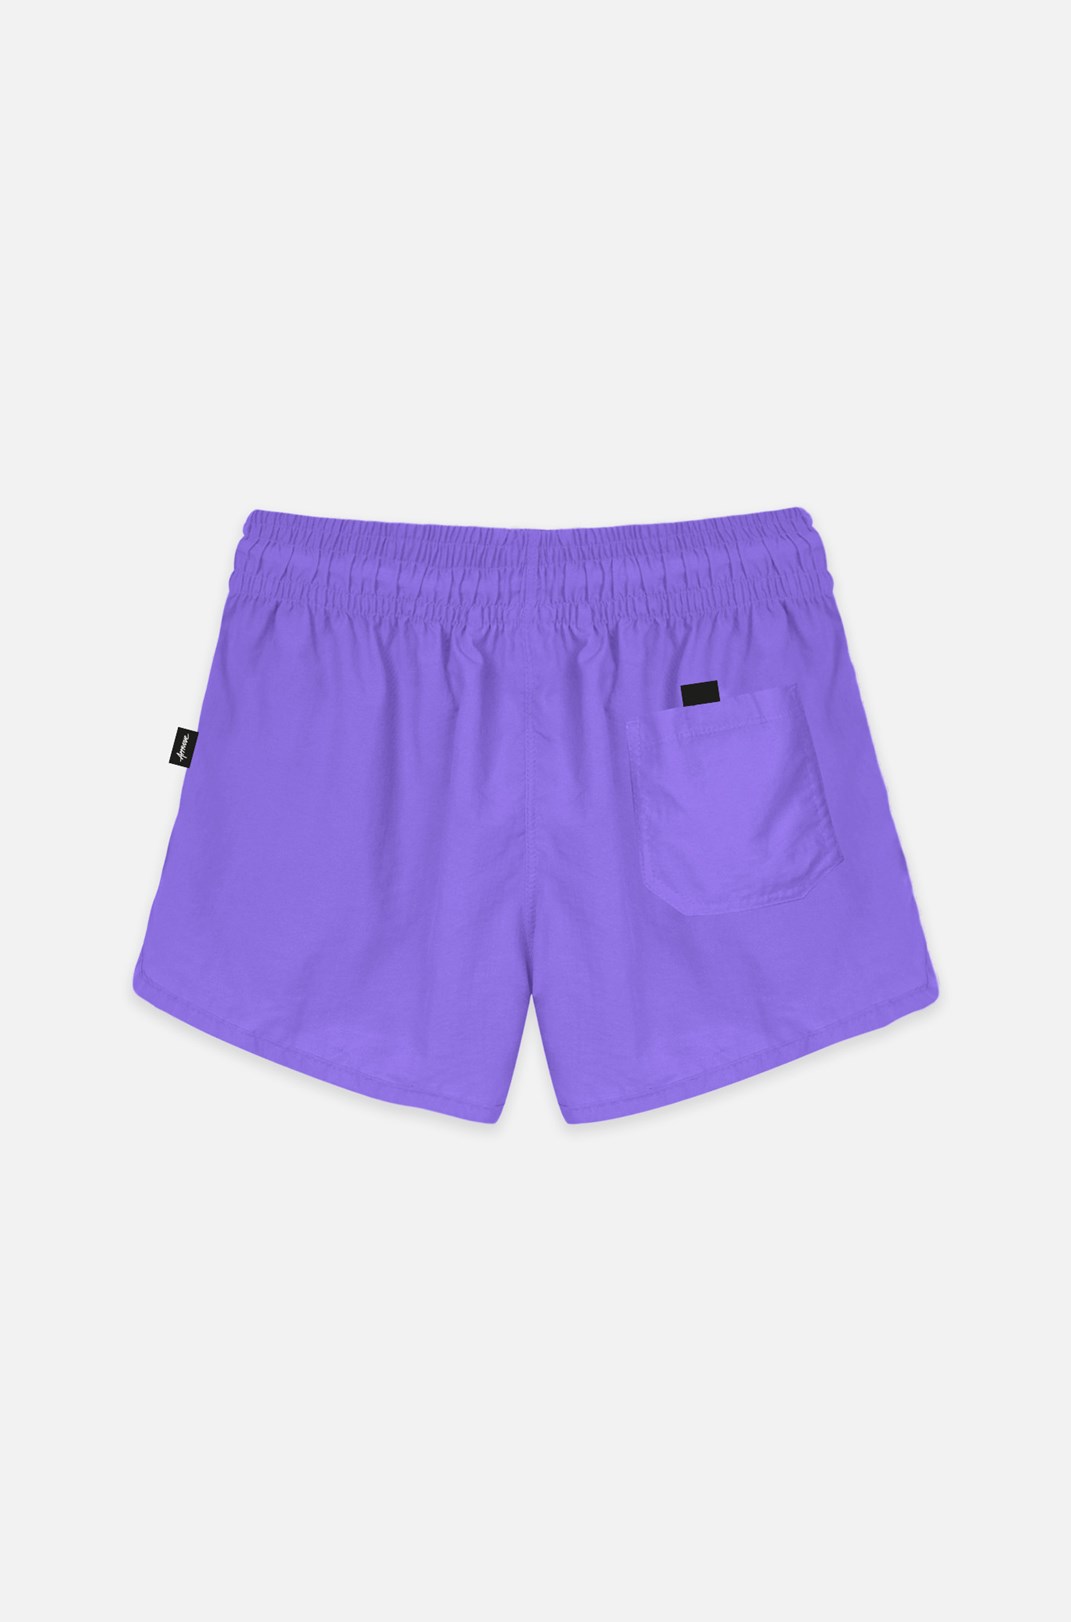 Shorts Approve Change The Planet Smile Roxo - Approve